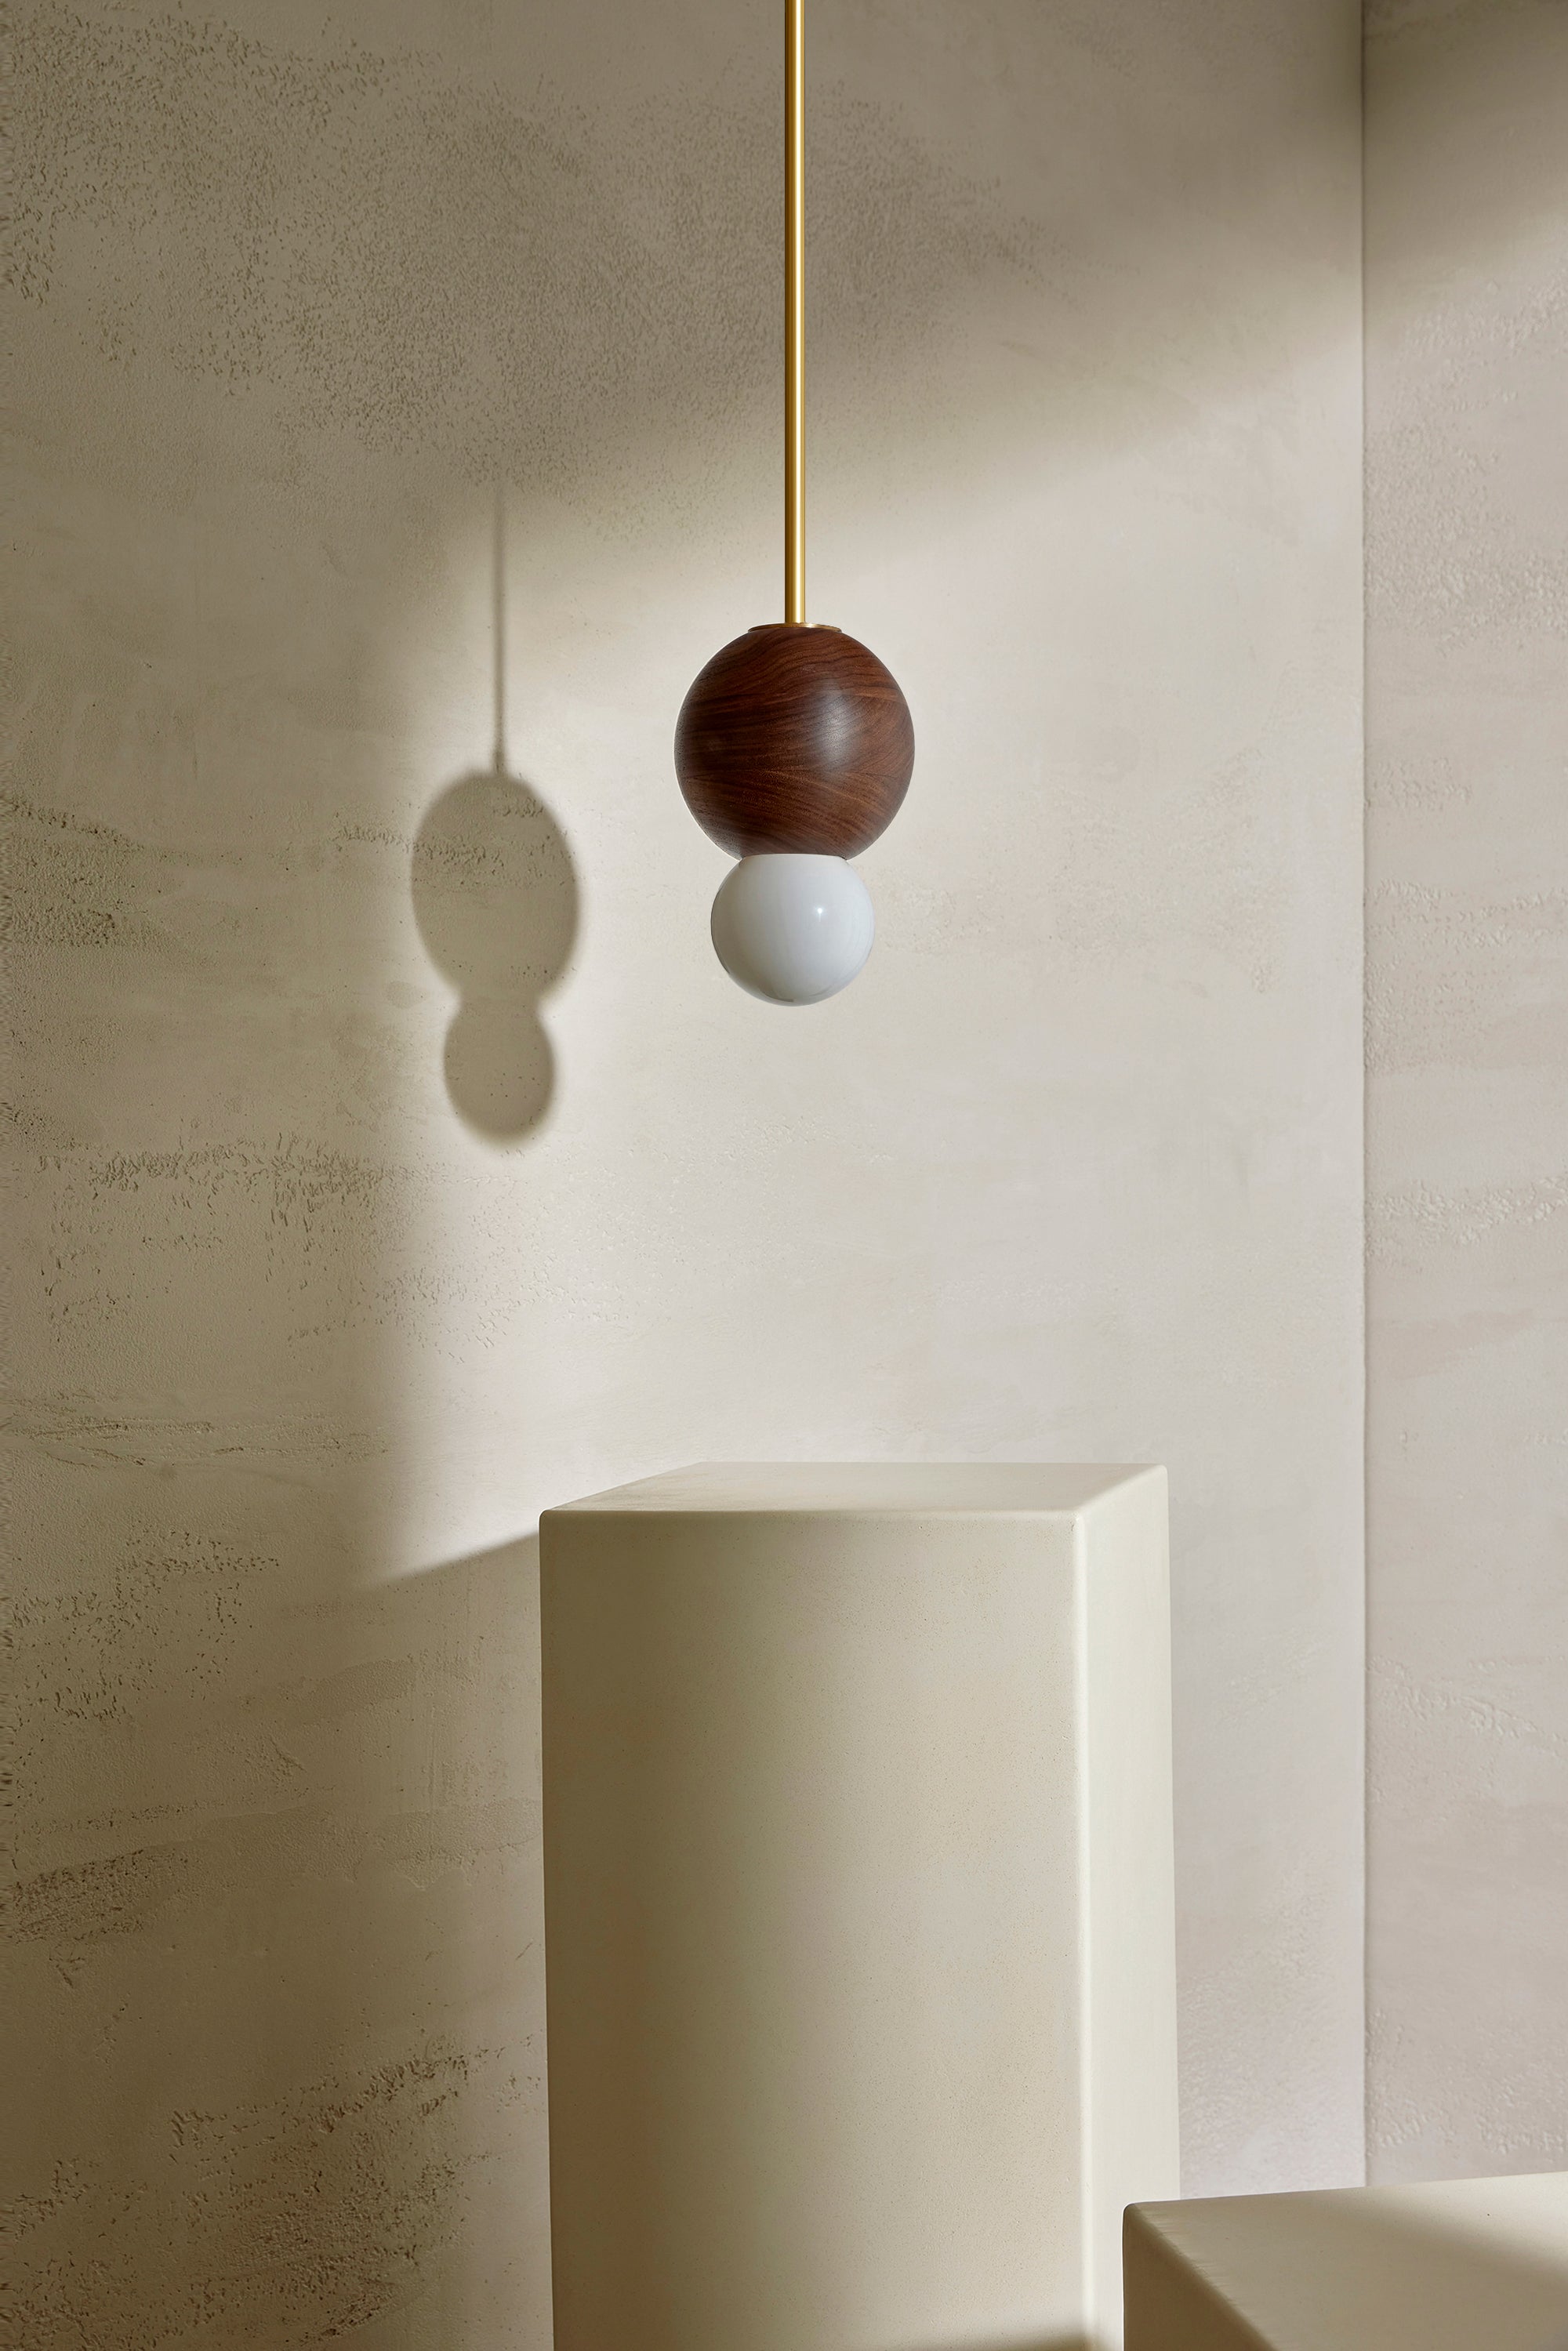 Bright Beads Sphere Pendant in Walnut, Brass & Opal. Photographed by Lawrence Furzey.